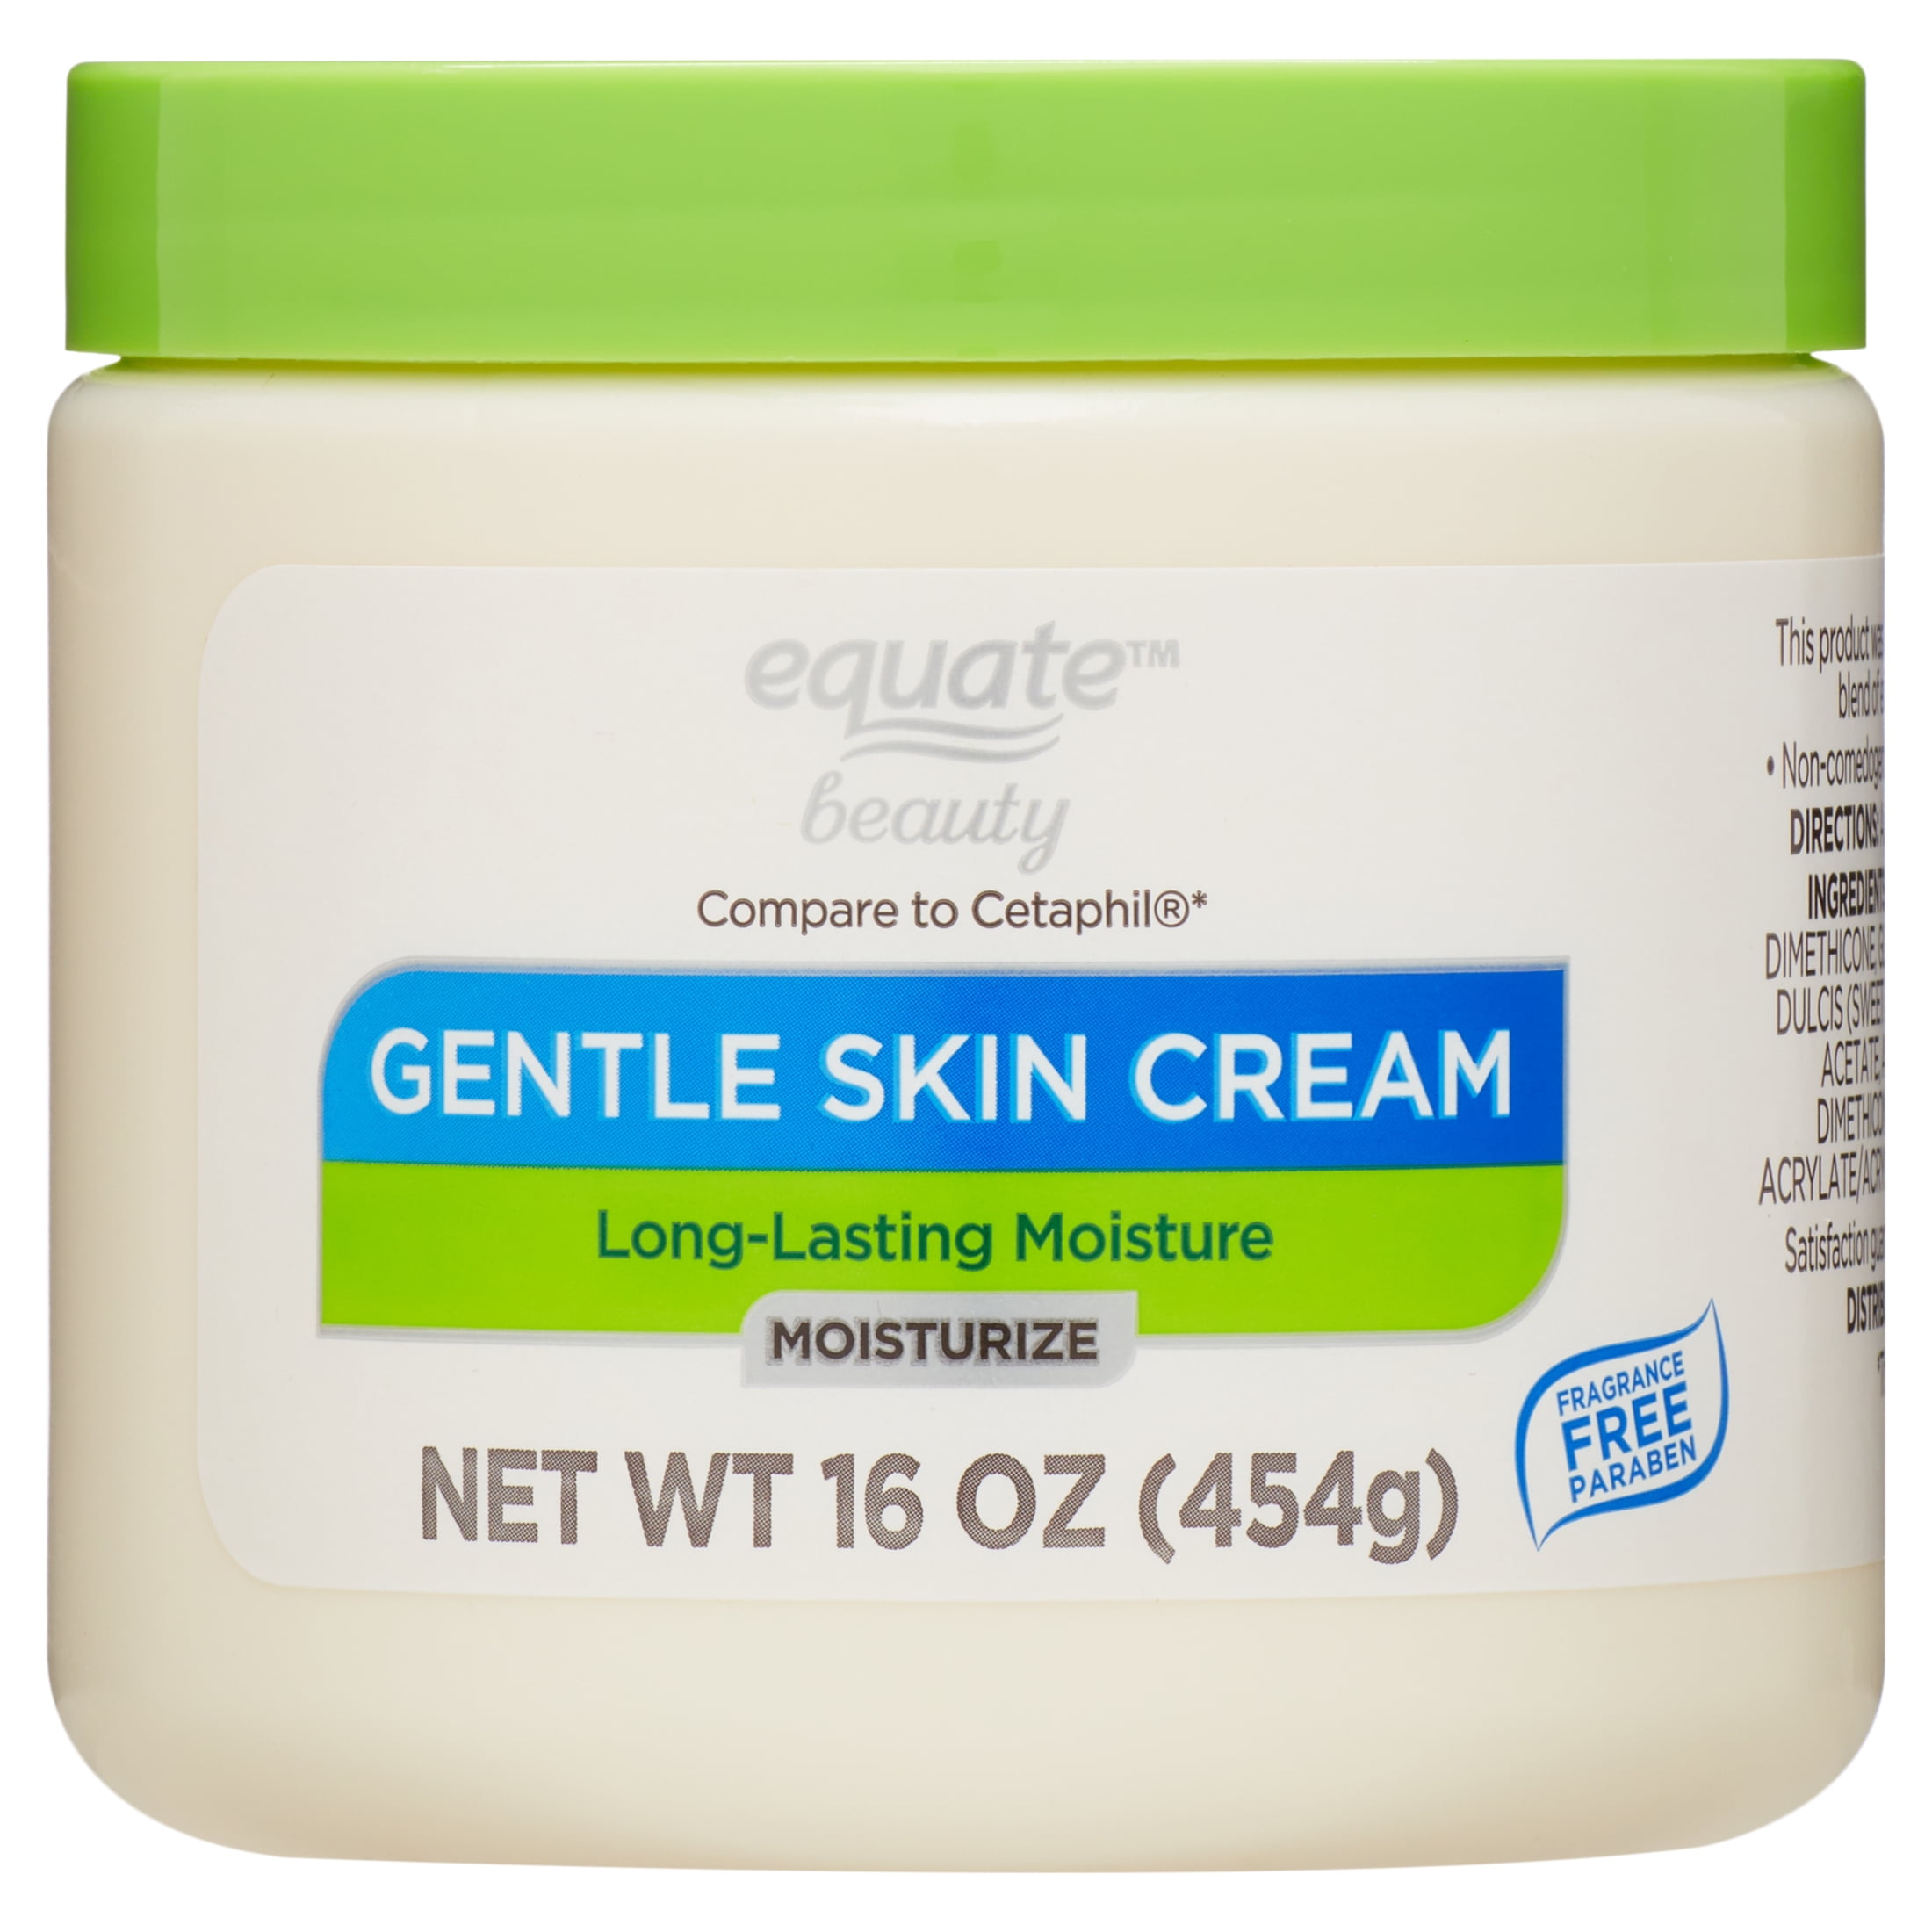 Equate Beauty Gentle Skin Cream with Long-Lasting Moisture, 16 oz